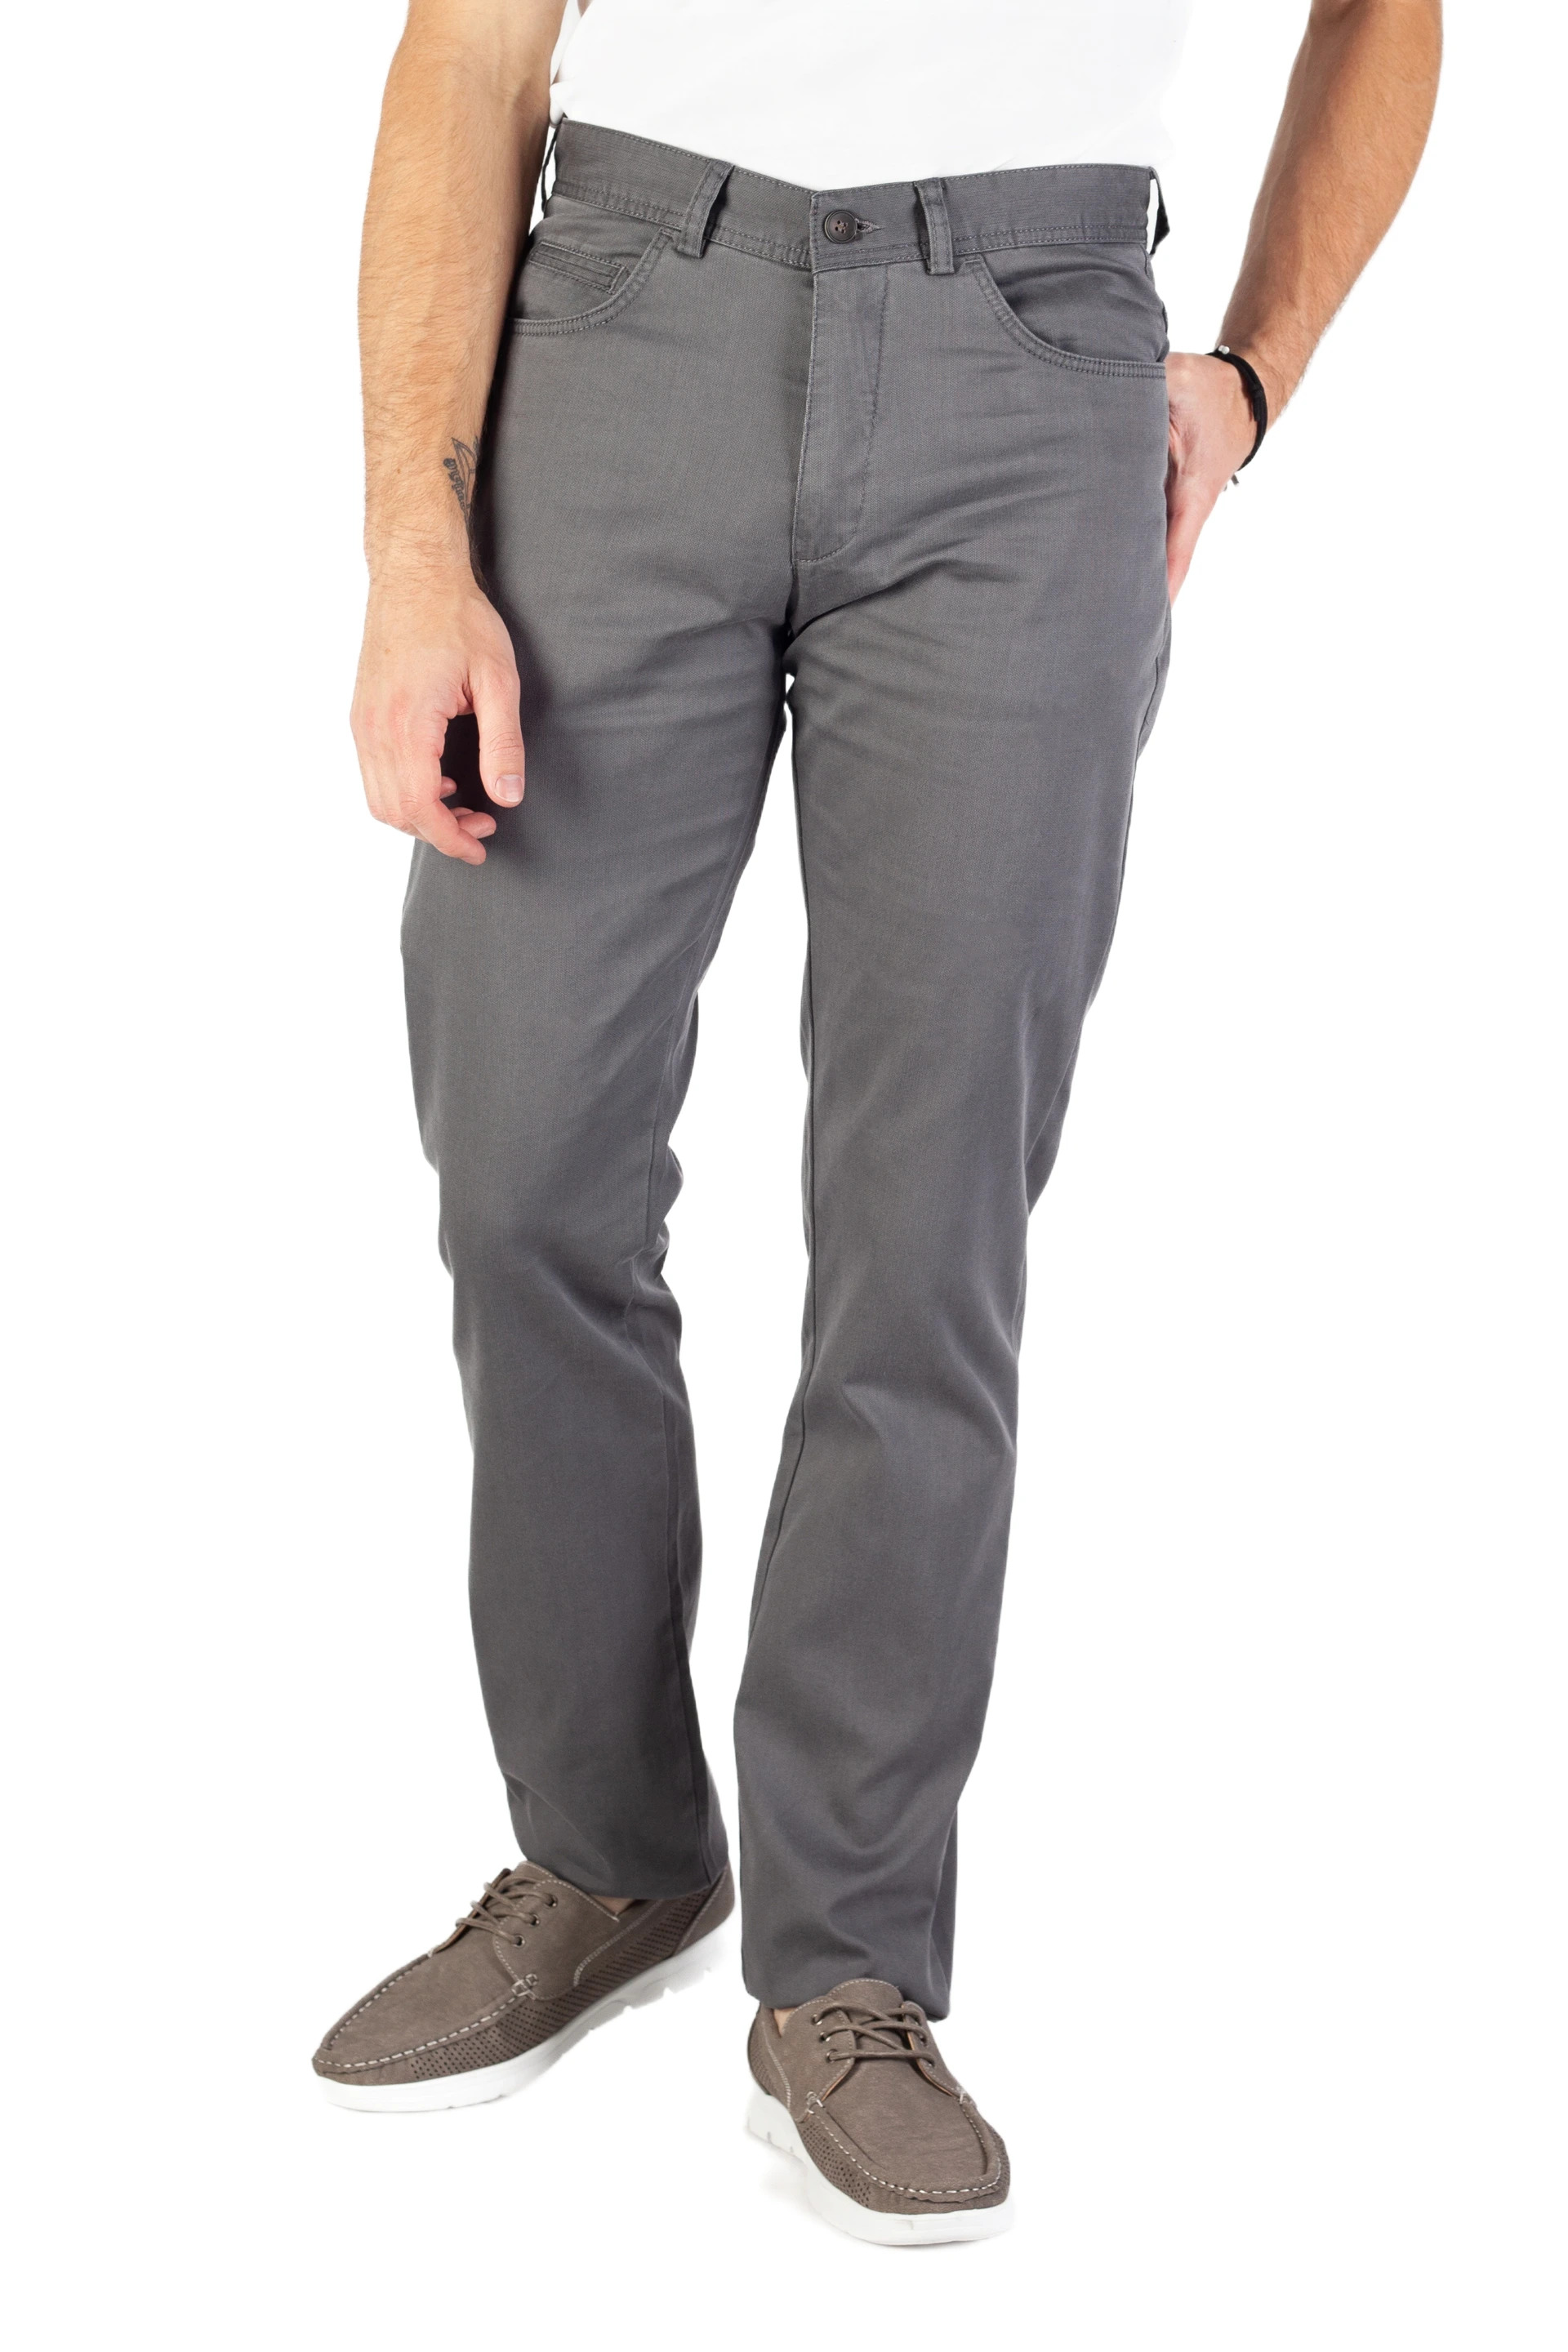 Chino pants BLK JEANS 8394-1000-132-206